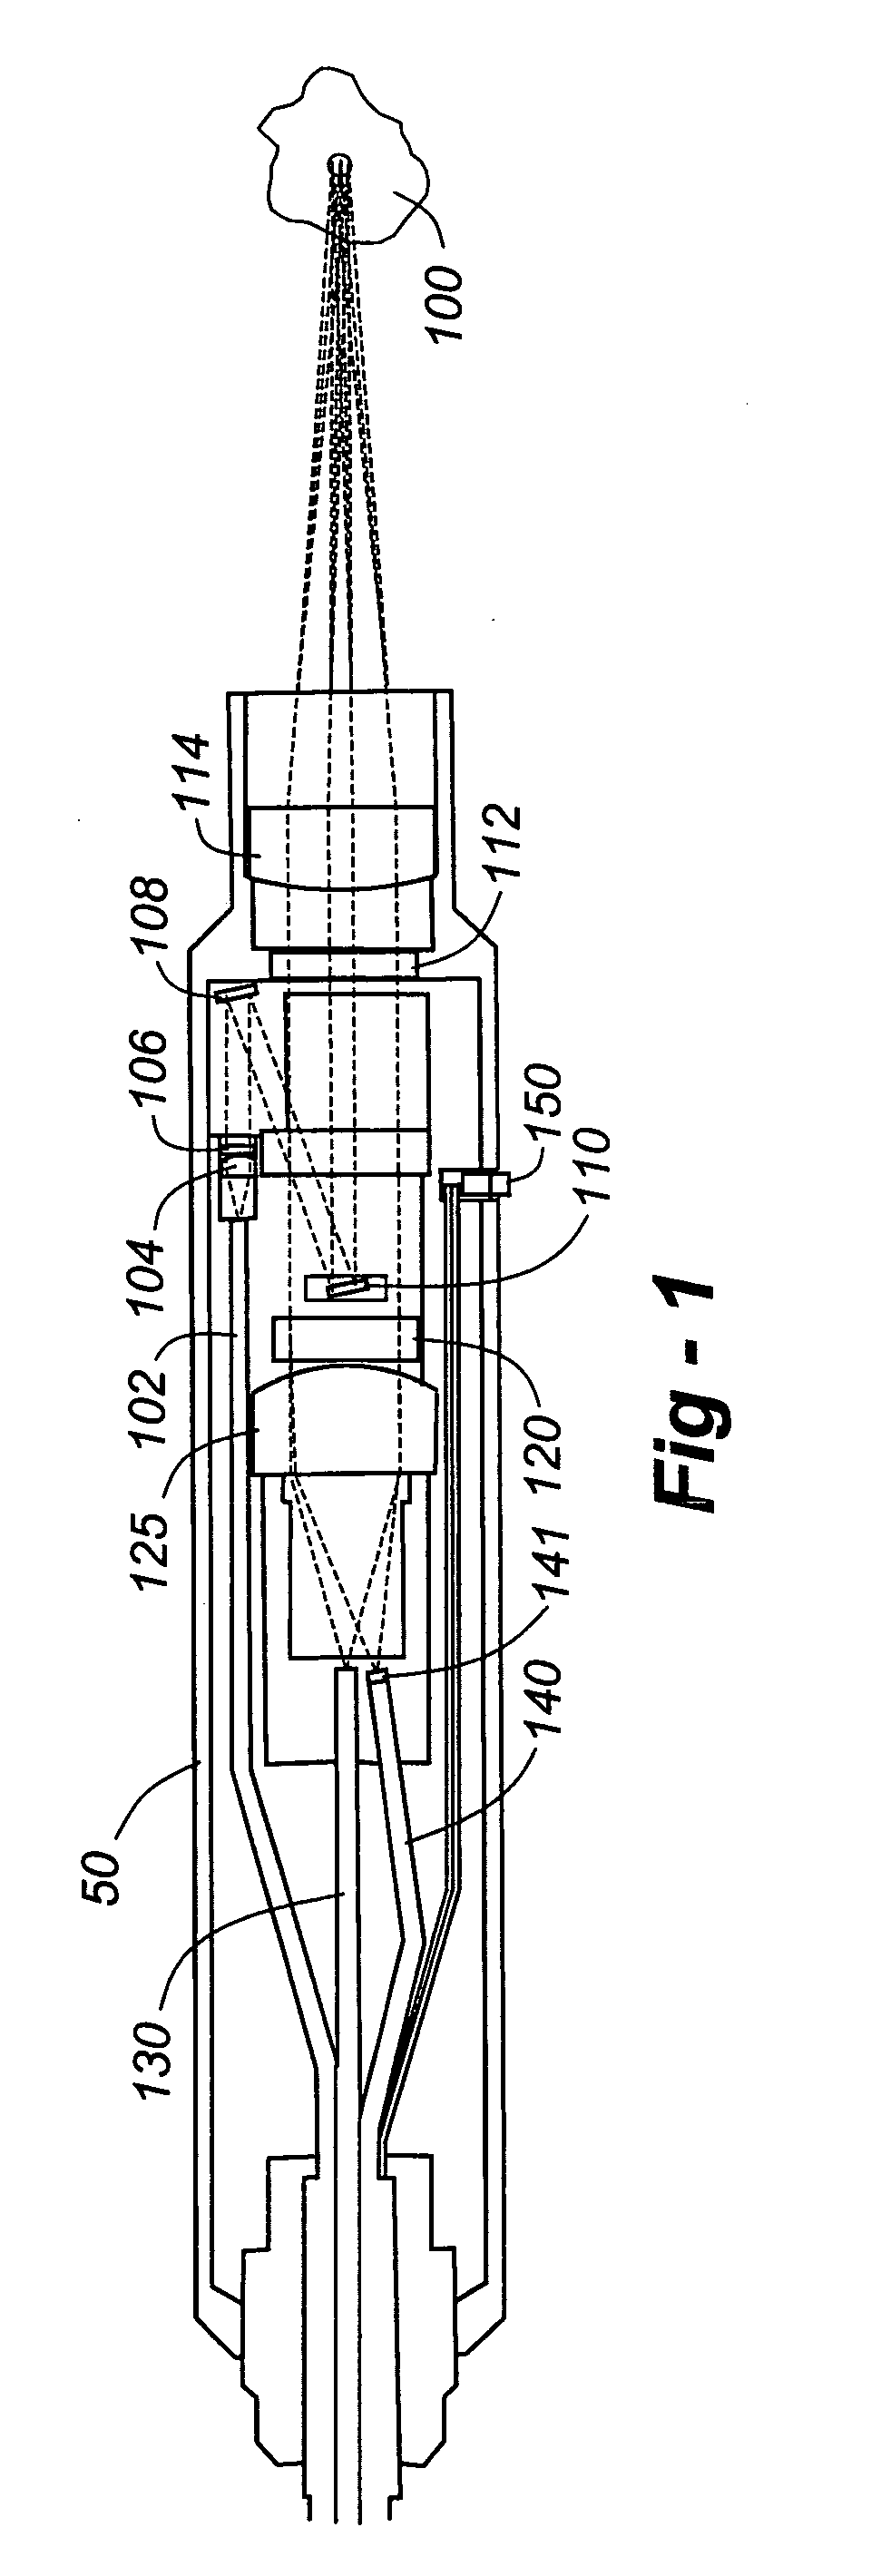 Large-collection-area optical probe